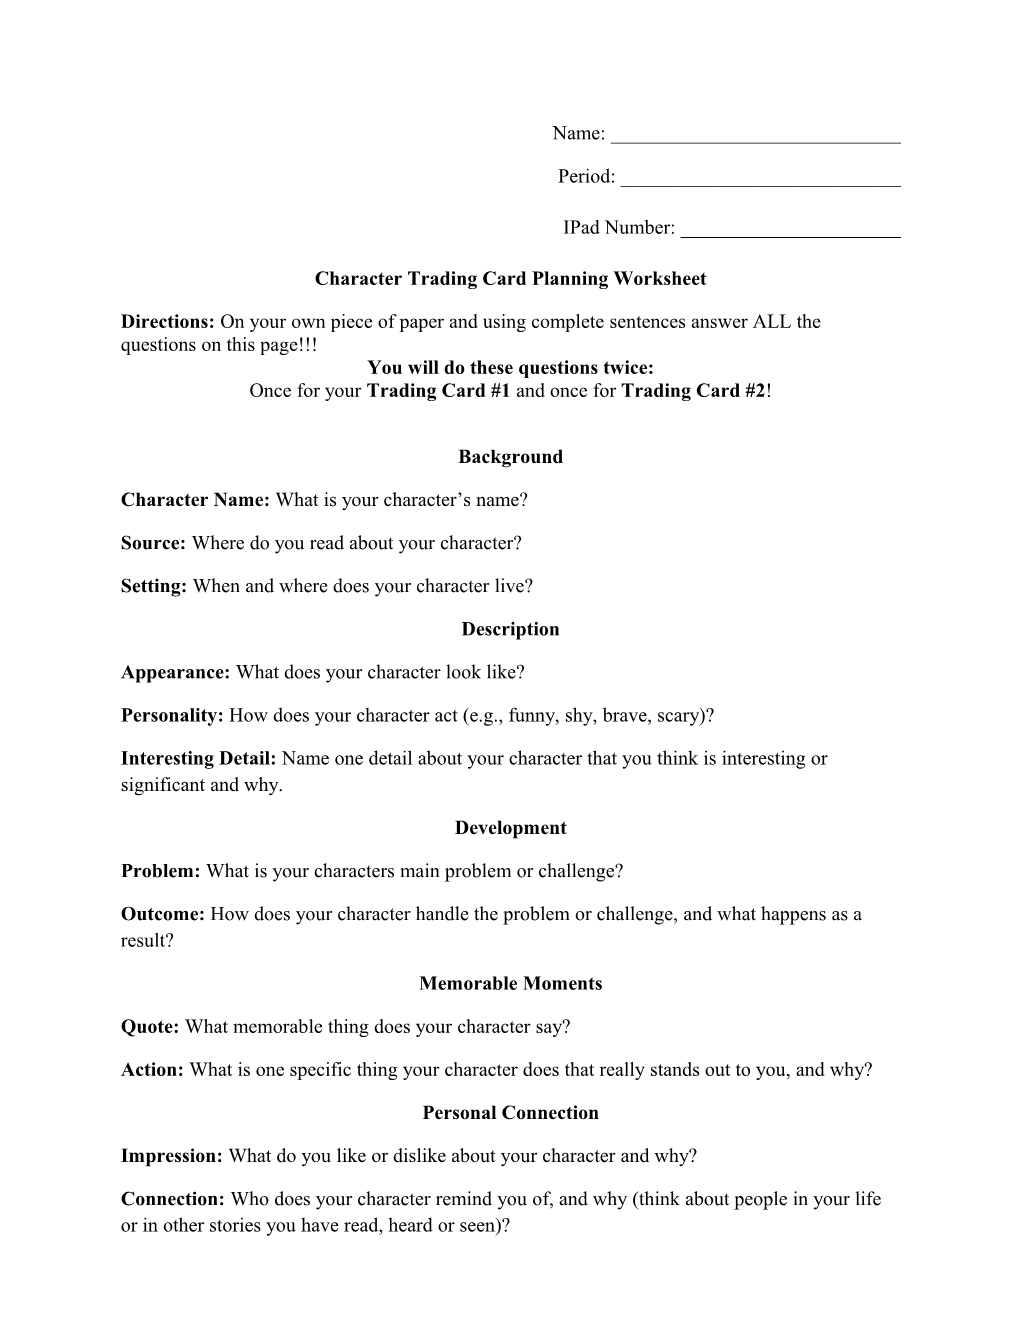 Character Trading Card Planning Worksheet